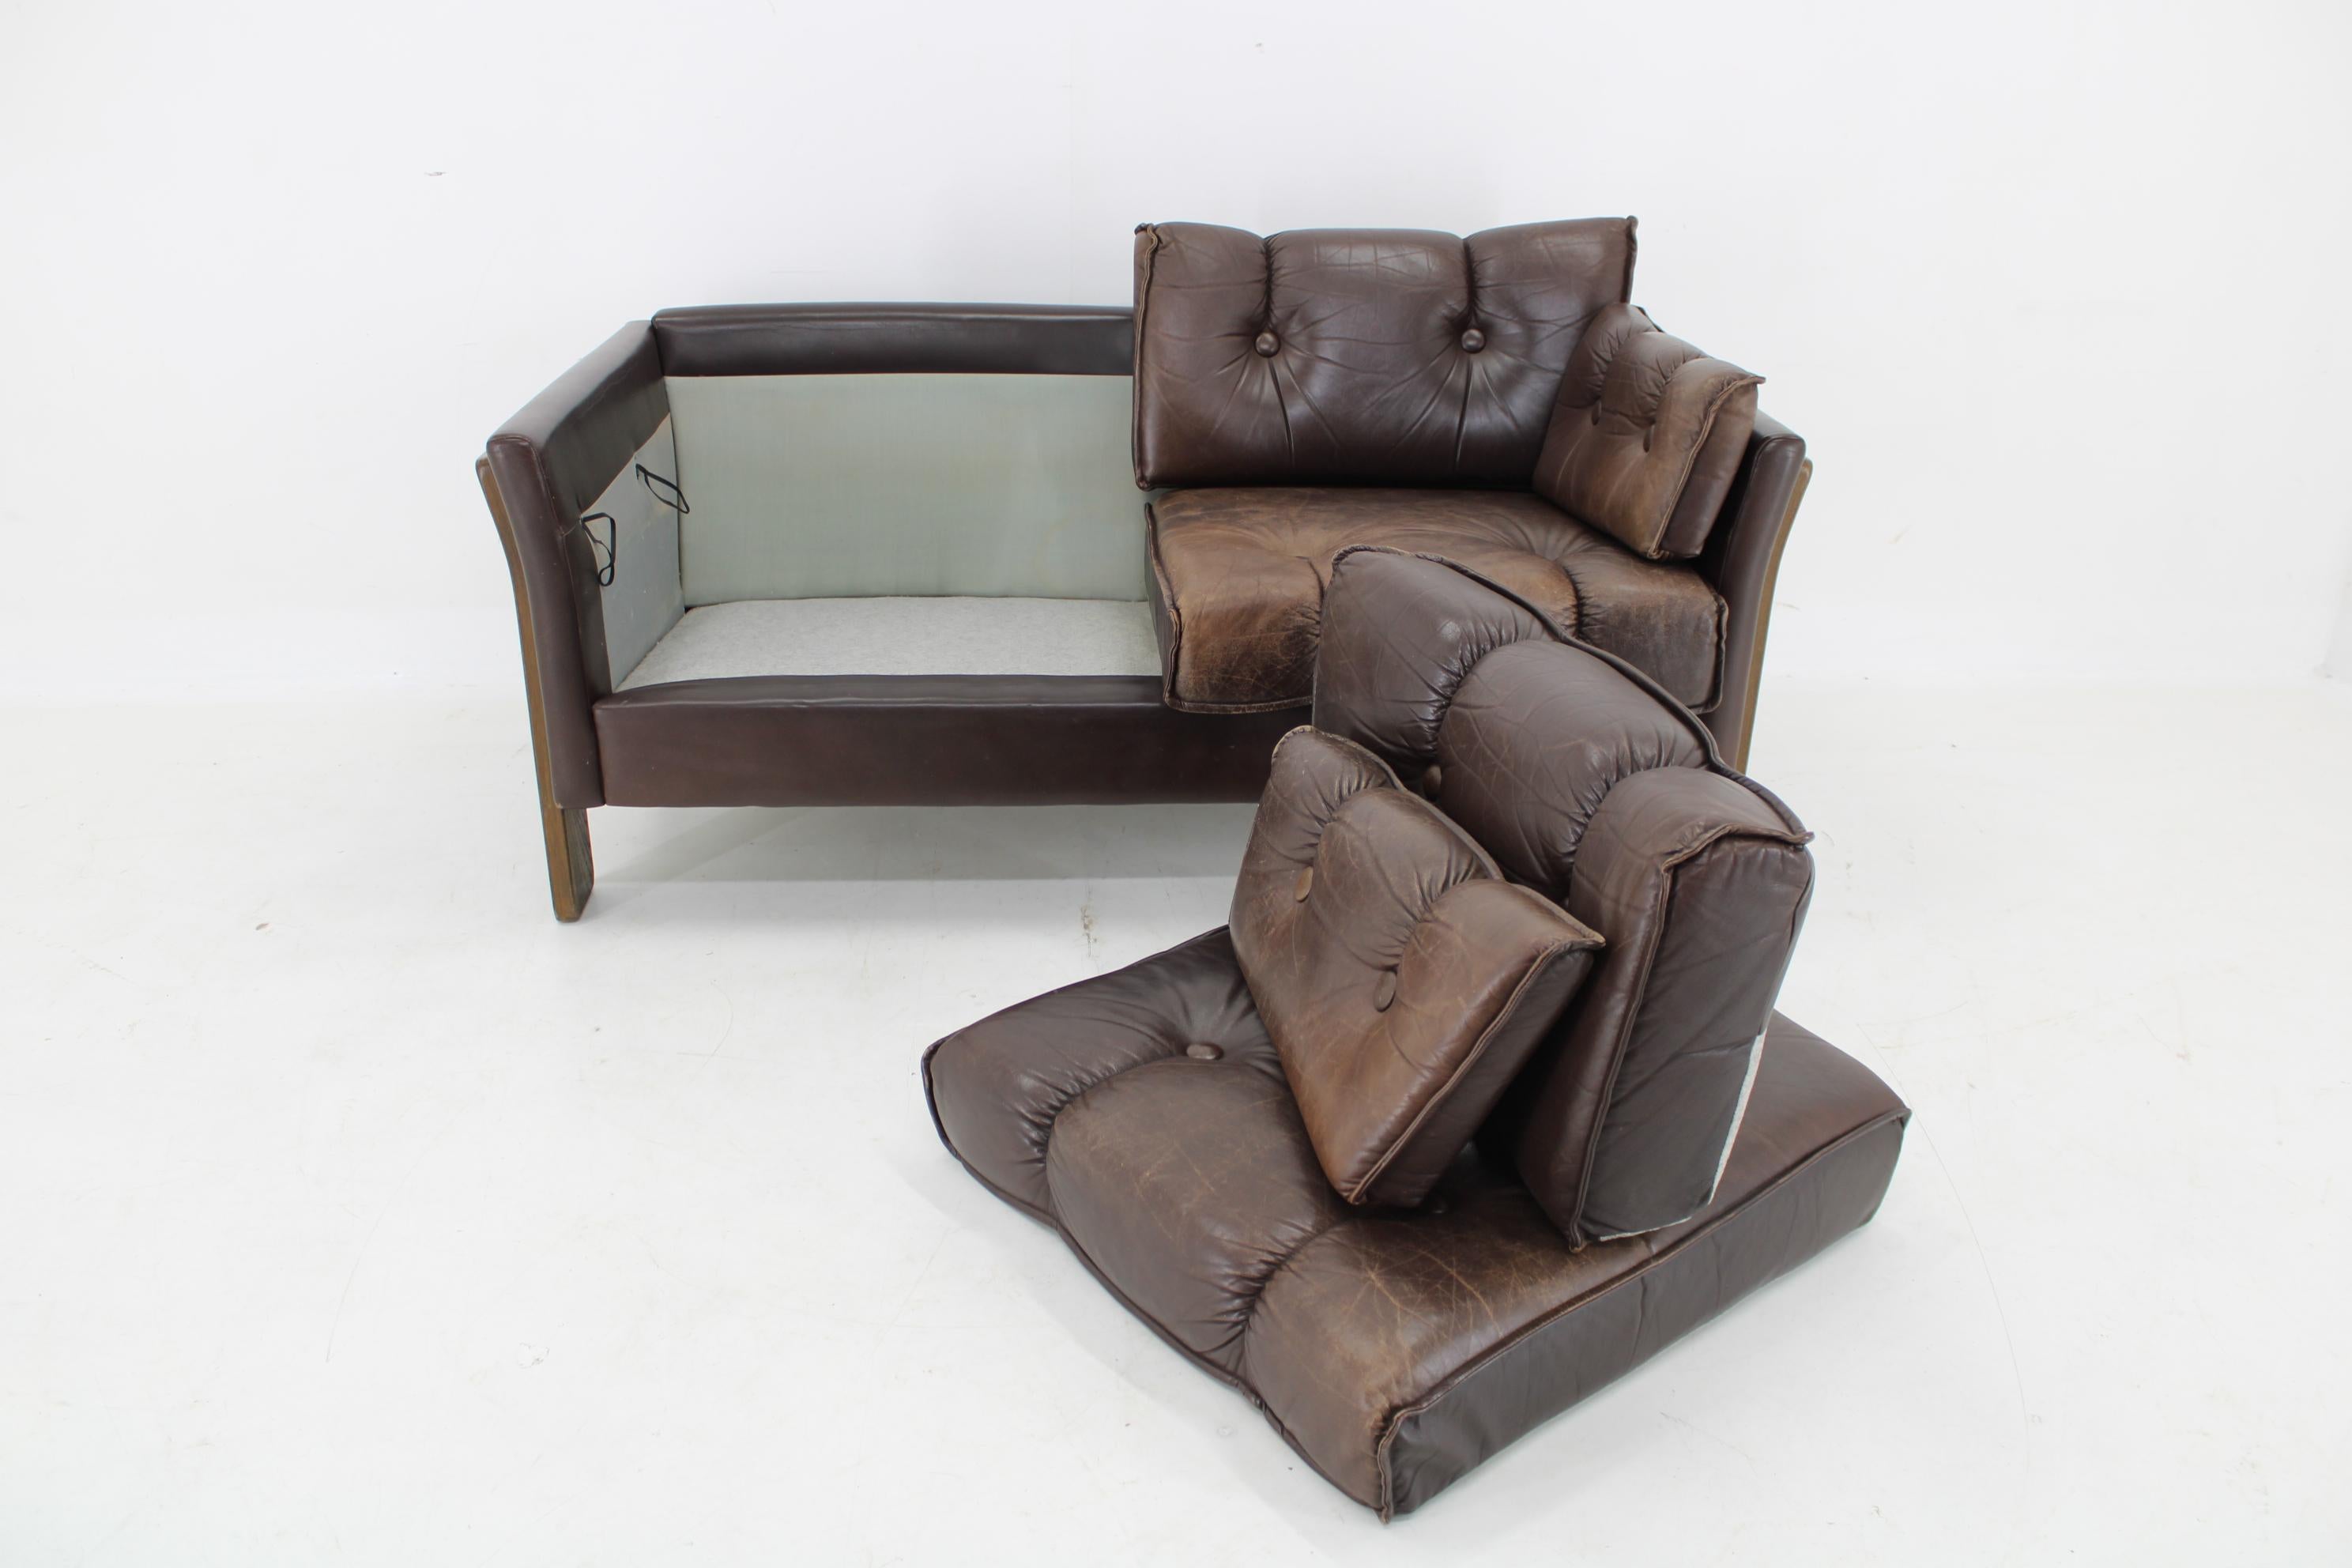 1970s Brown Leather 2-Seater Sofa, Denmark For Sale 8